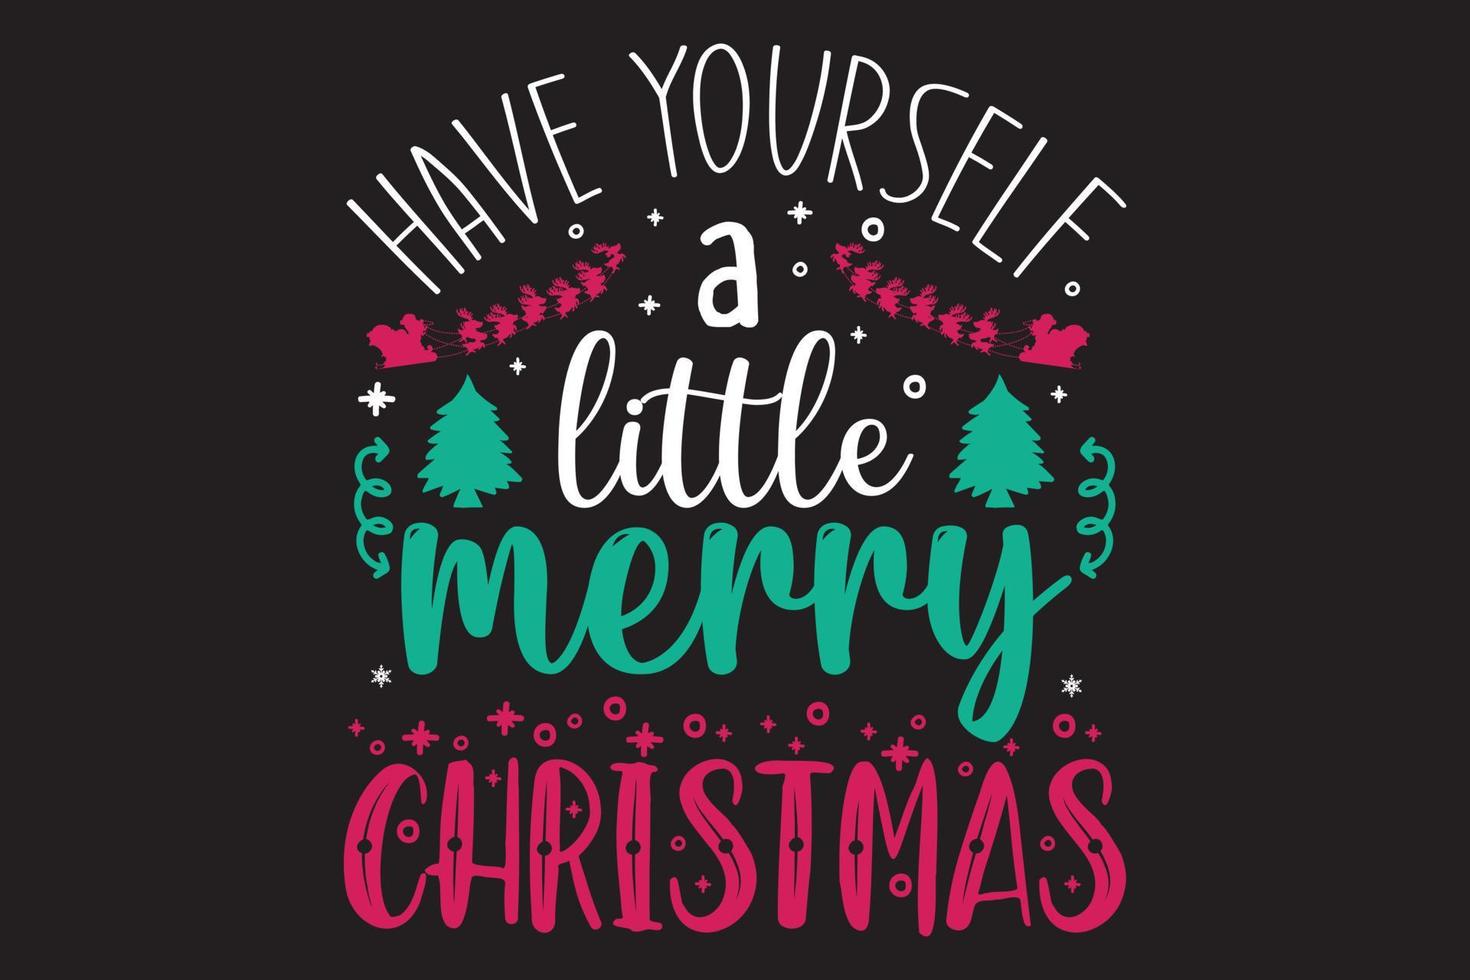 Have yourself a little merry Christmas t shirt design vector